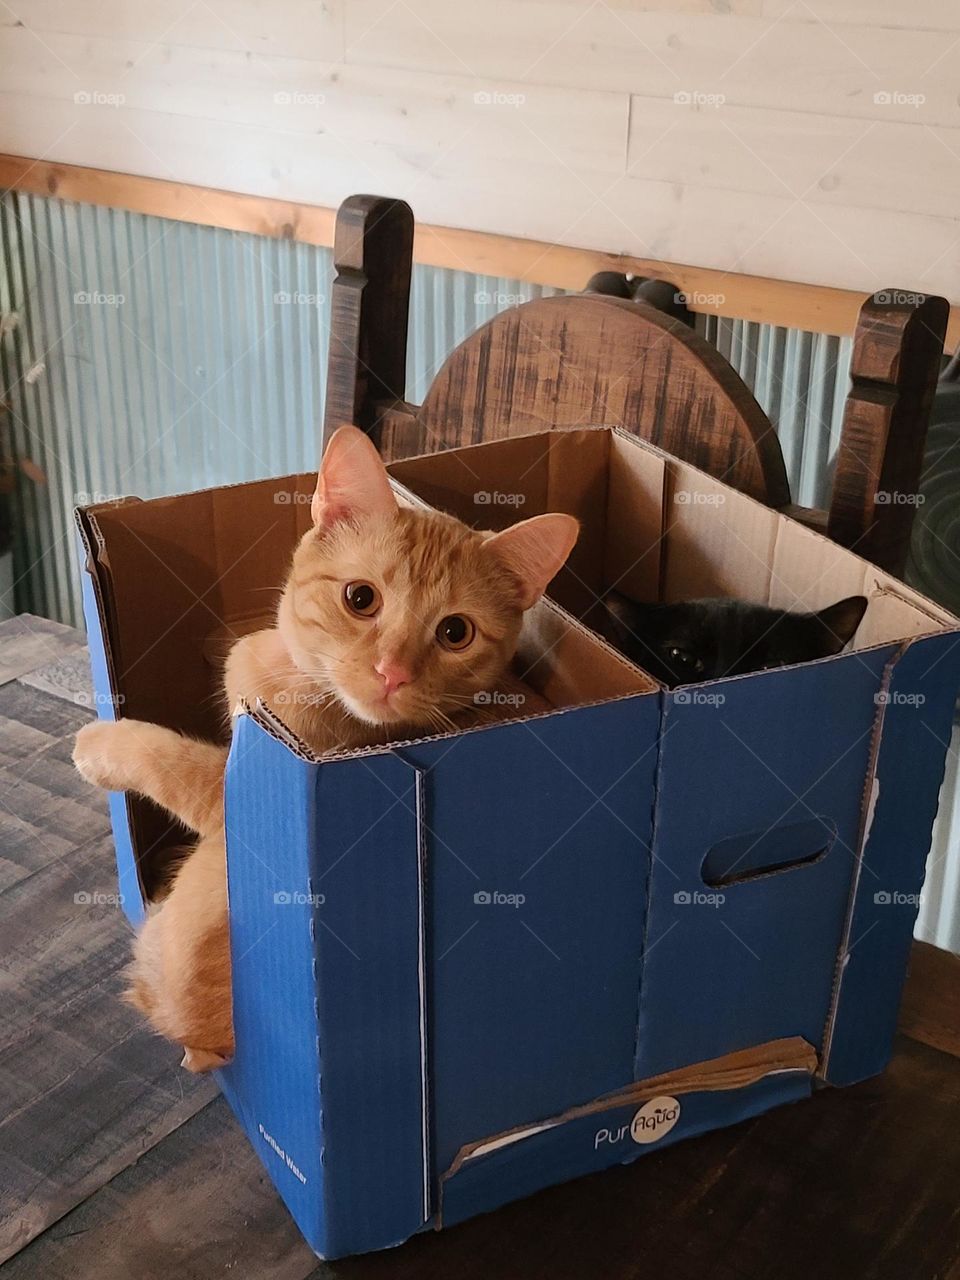 kitty in boxes